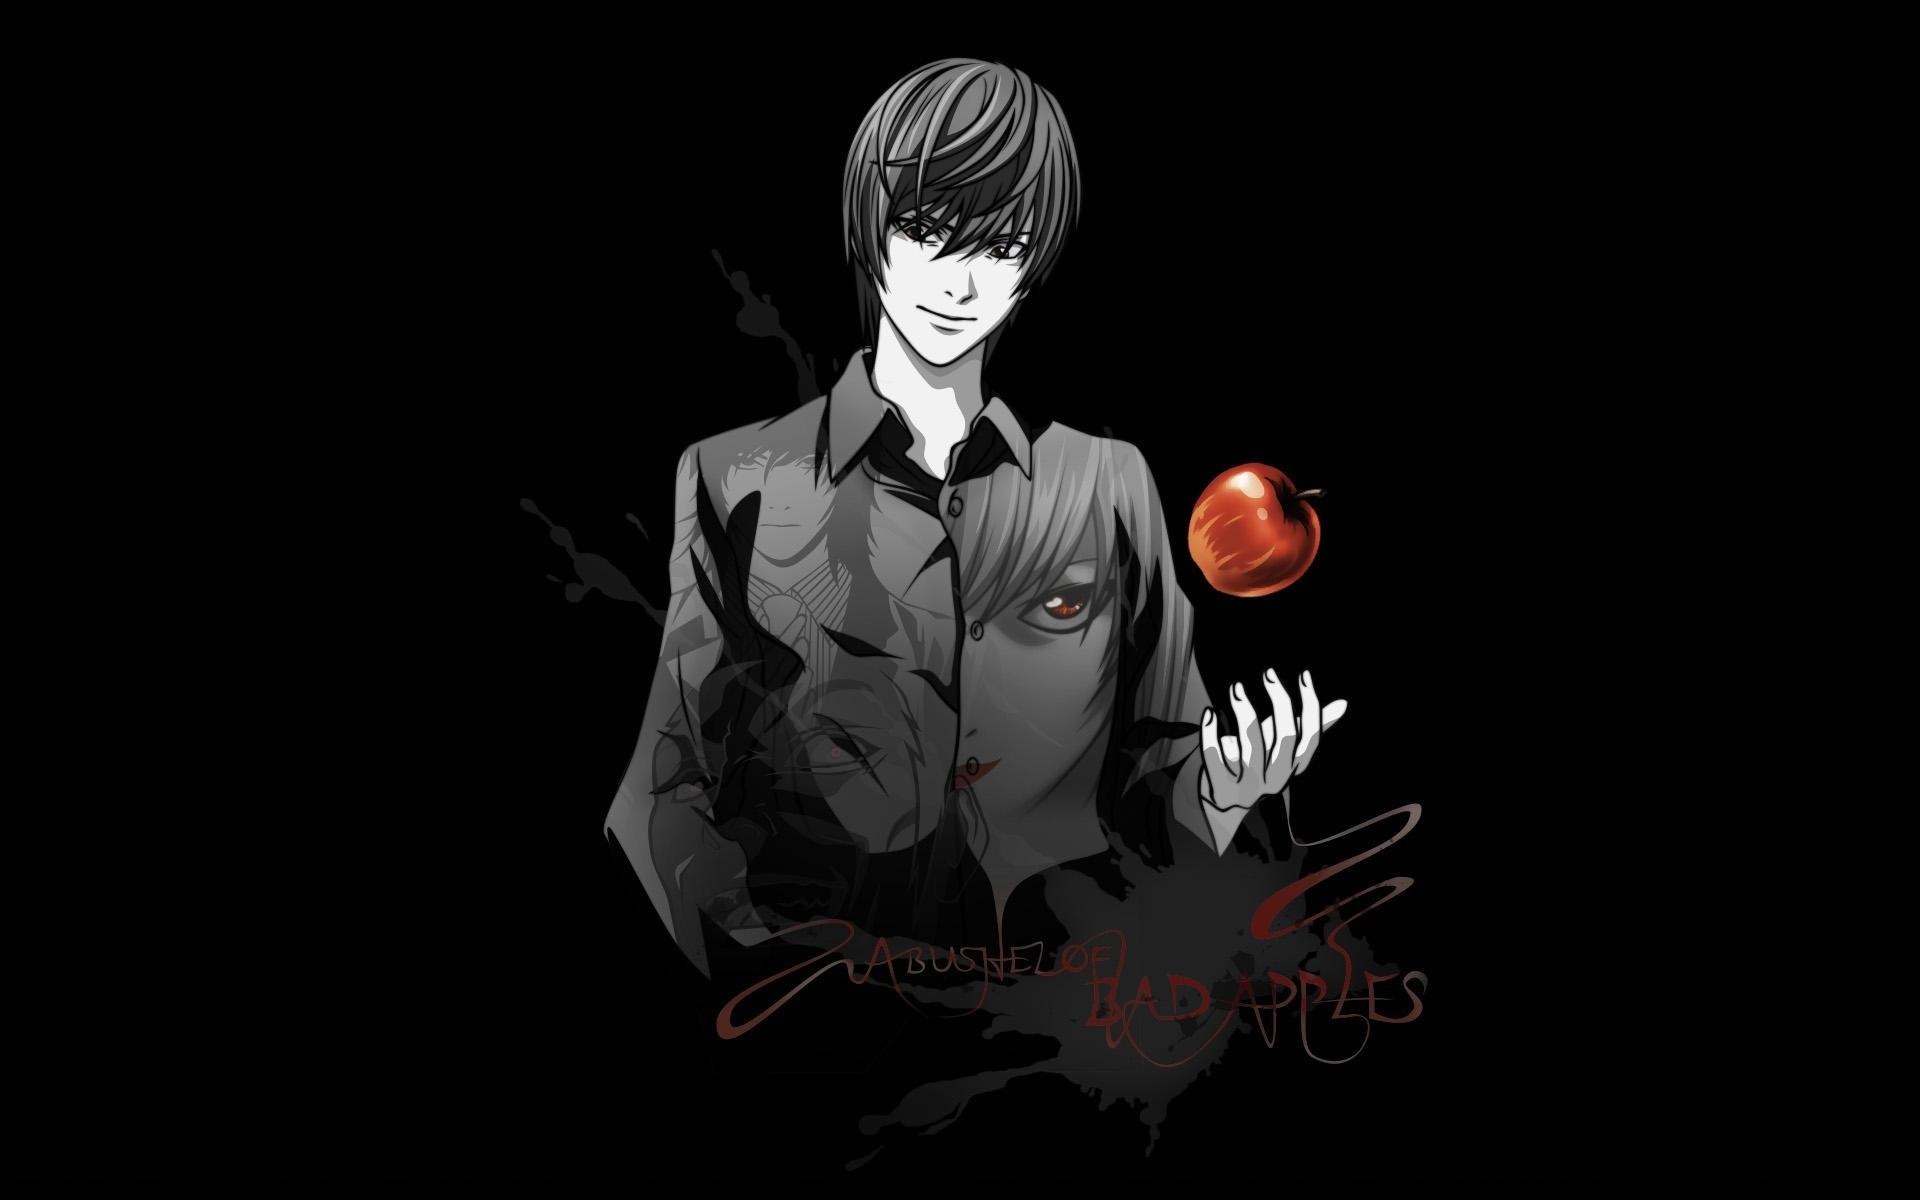 Popular Death Note Image for Phone